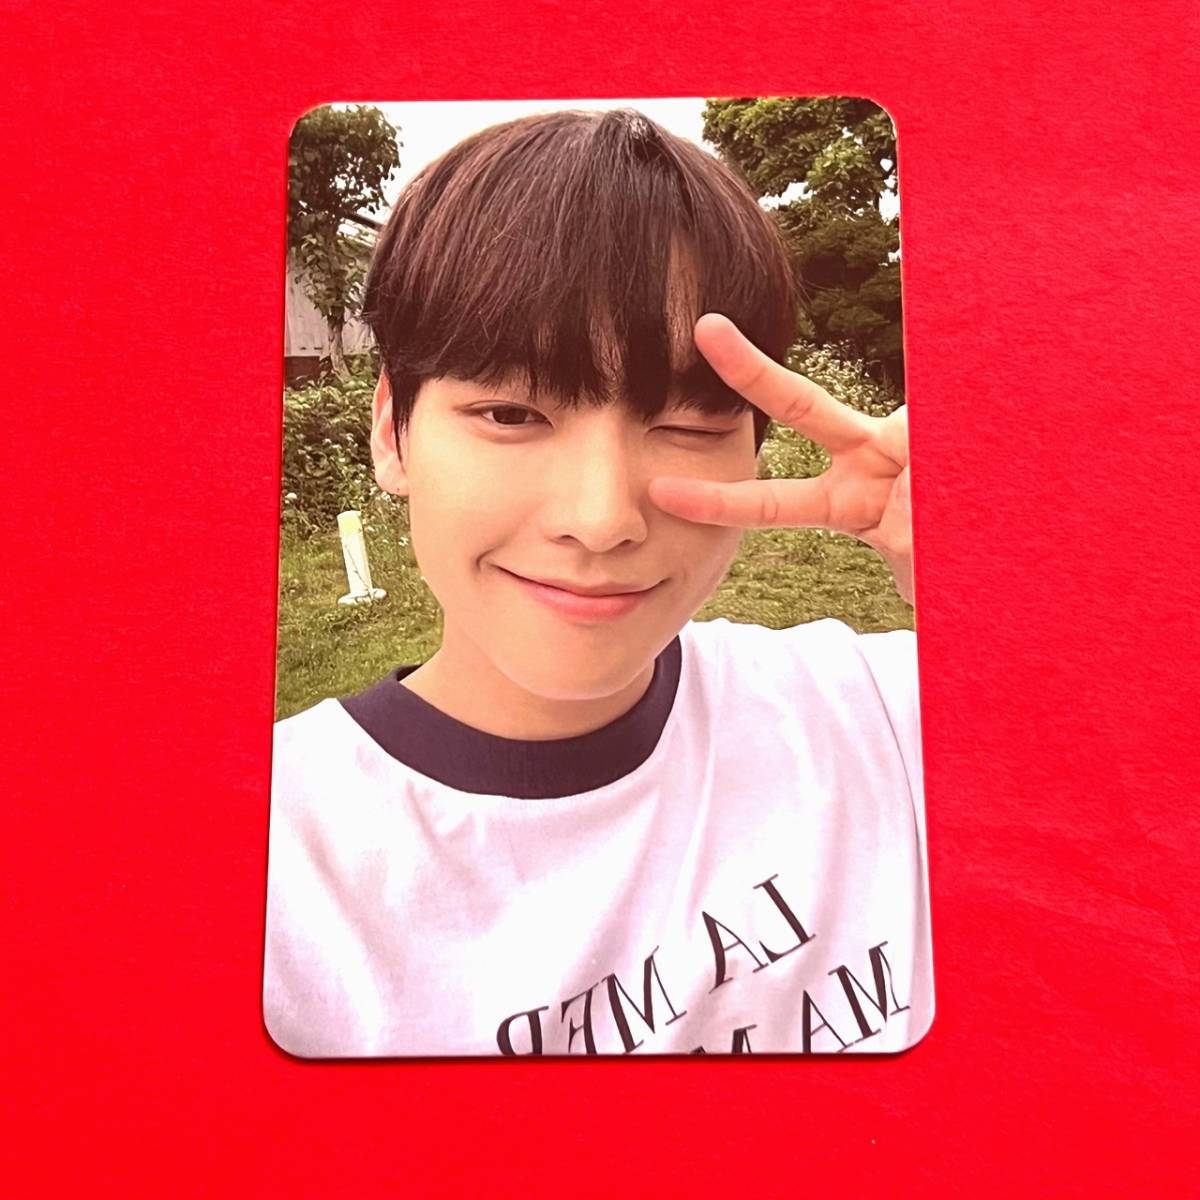 SF9 エスエフナイン FNC STORE COMMA PHOTO CARD A ver. フォトカード トレカ 1枚 INSEONG インソン ② 即決_画像1